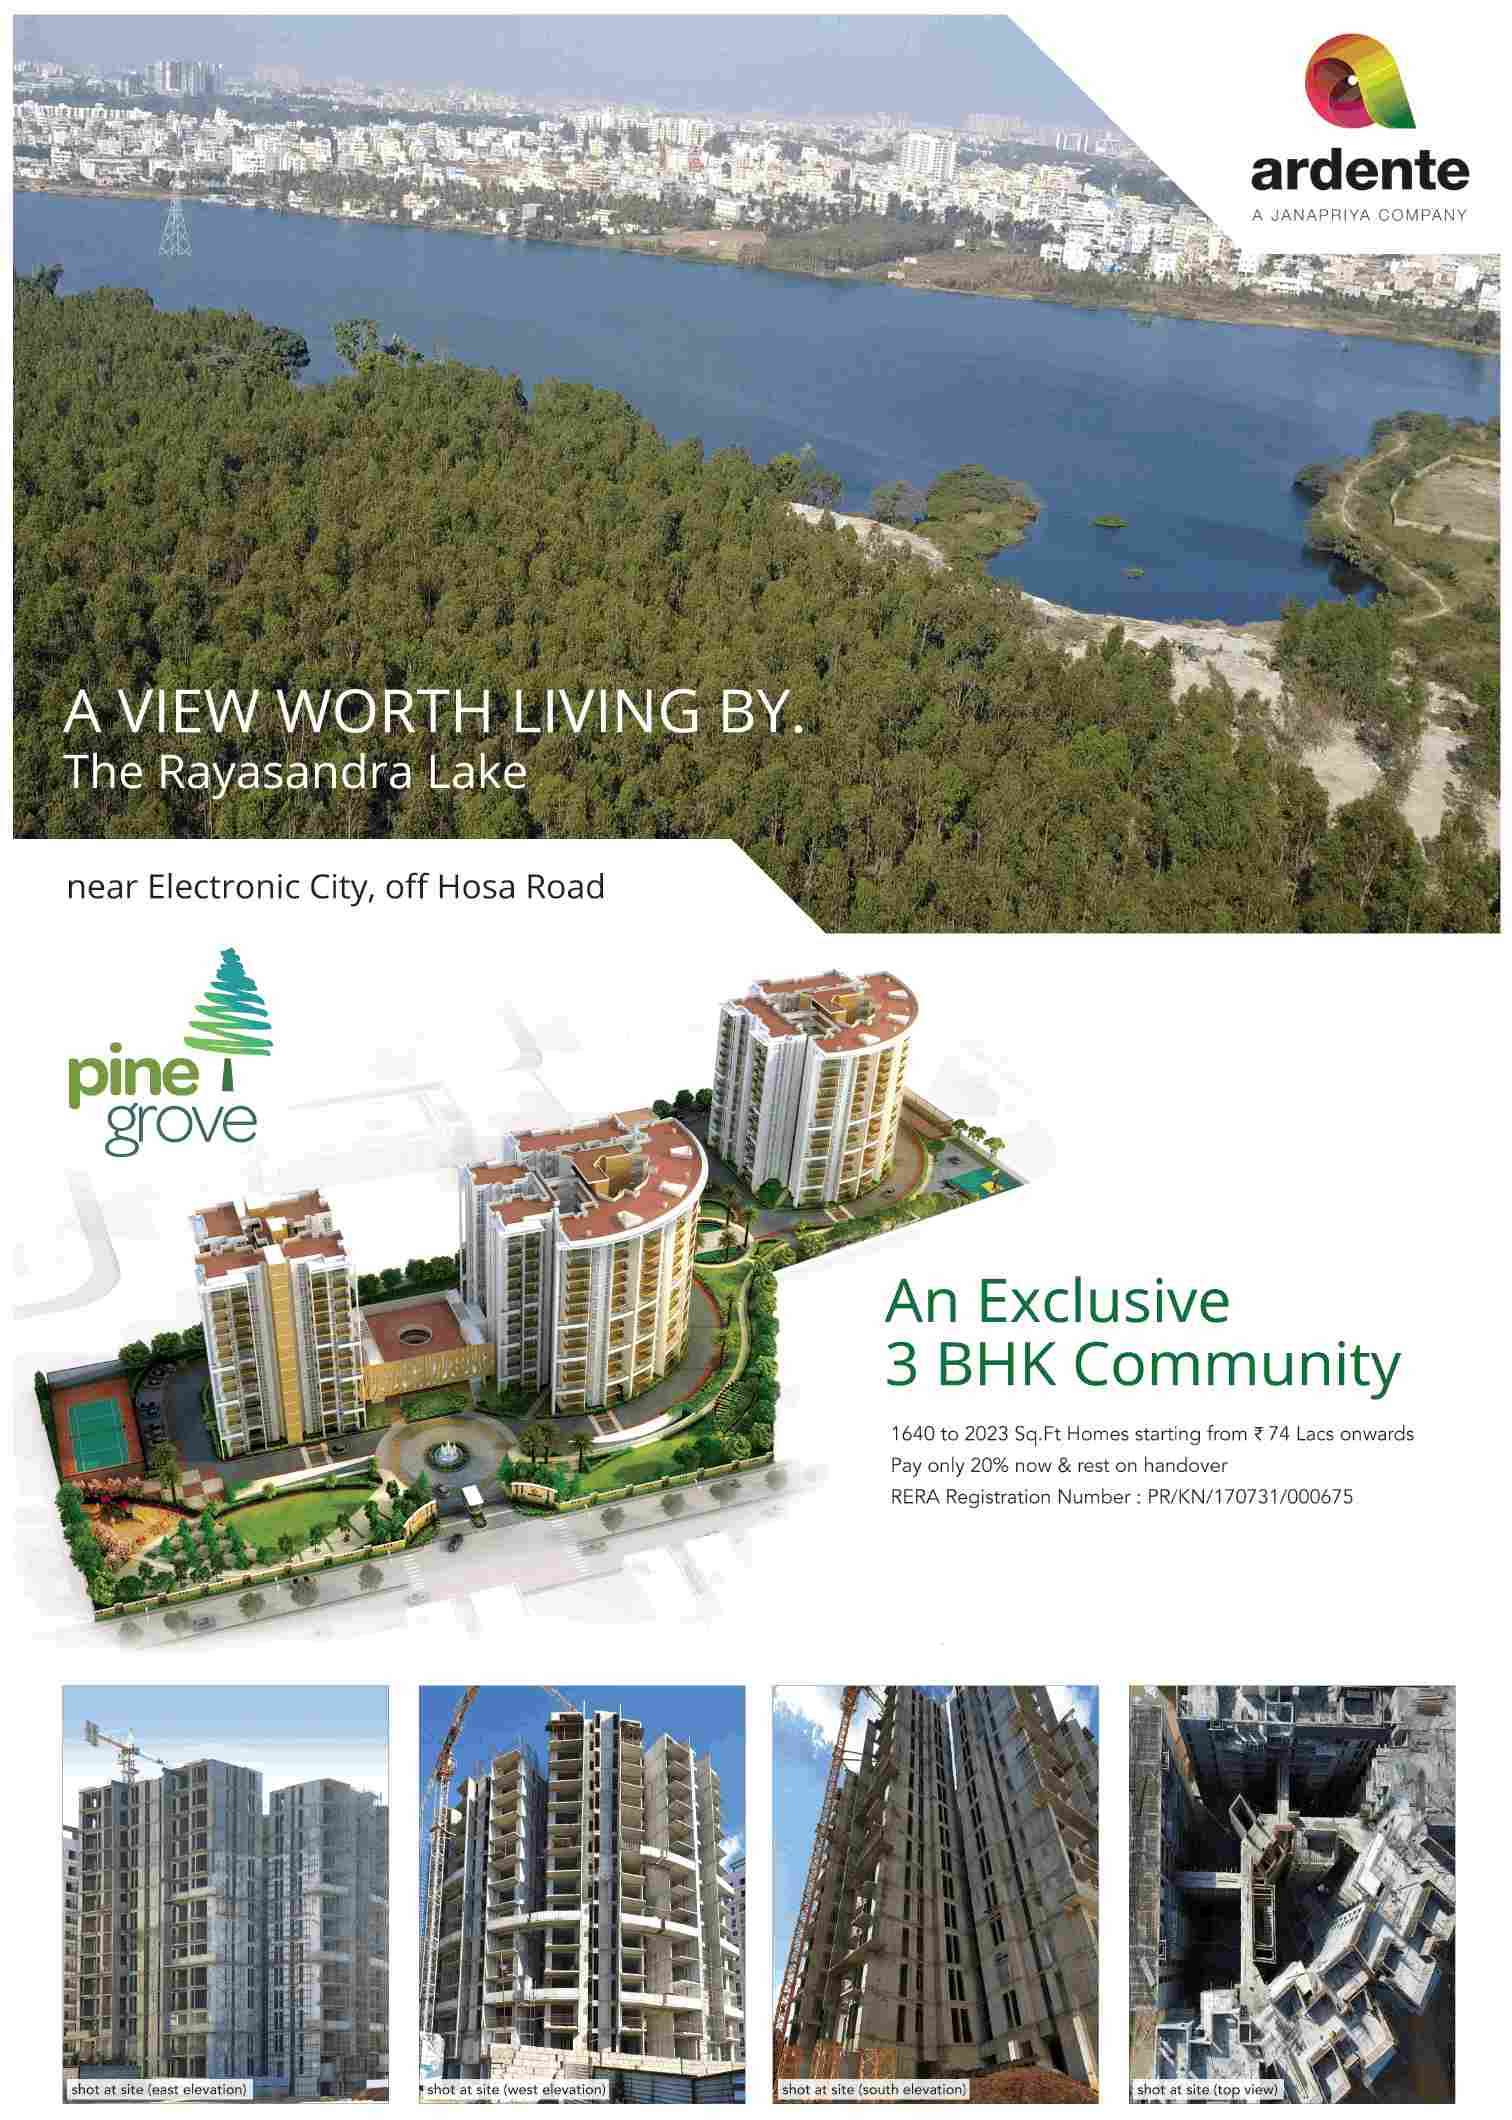 Book exclusive 3 BHK homes @ Rs 74 Lacs at Ardente Pine Grove in Bangalore Update